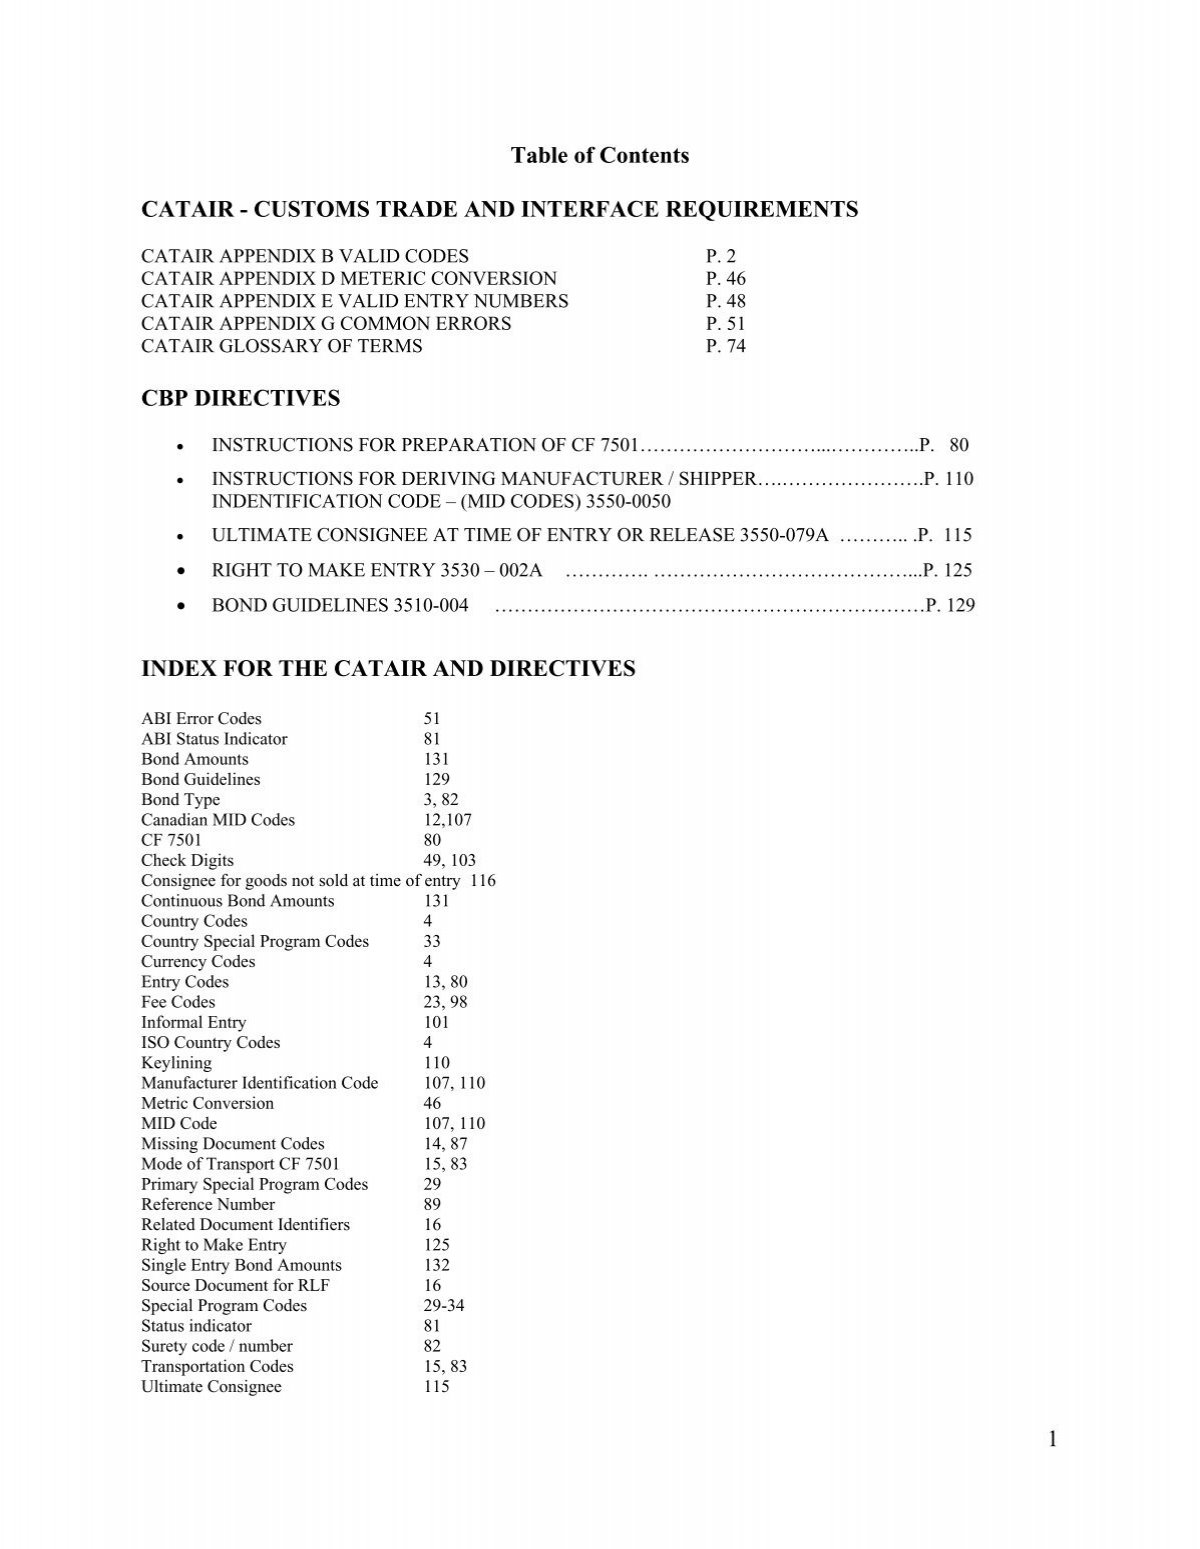 1 Table of Contents CATAIR - CUSTOMS TRADE AND INTERFACE